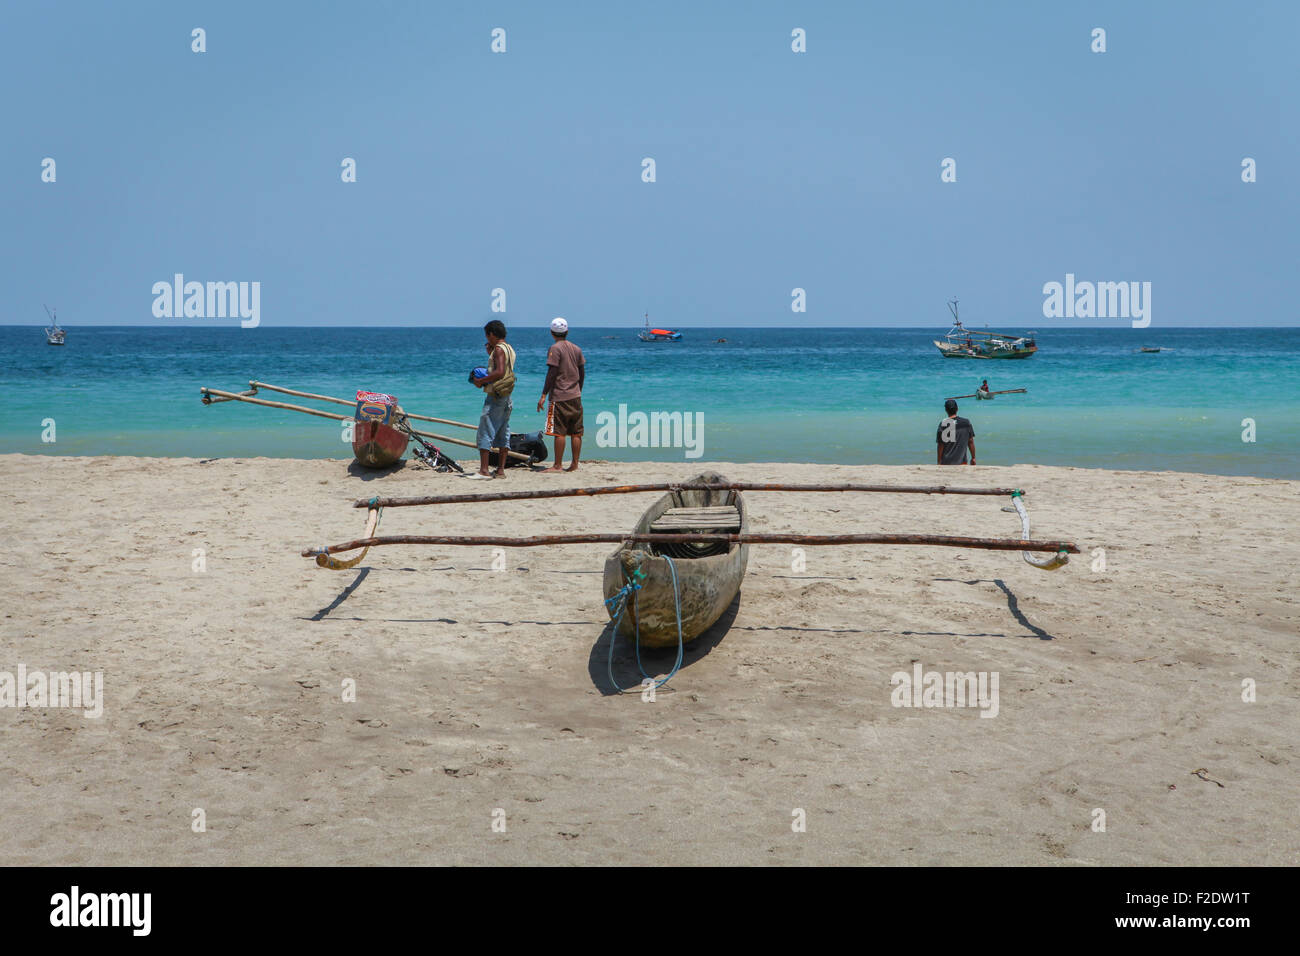 Canoes and fishermen on the beach in a background of Indian Ocean are seen in Wanokaka, West Sumba, East Nusa Tenggara, Indonesia. Stock Photo